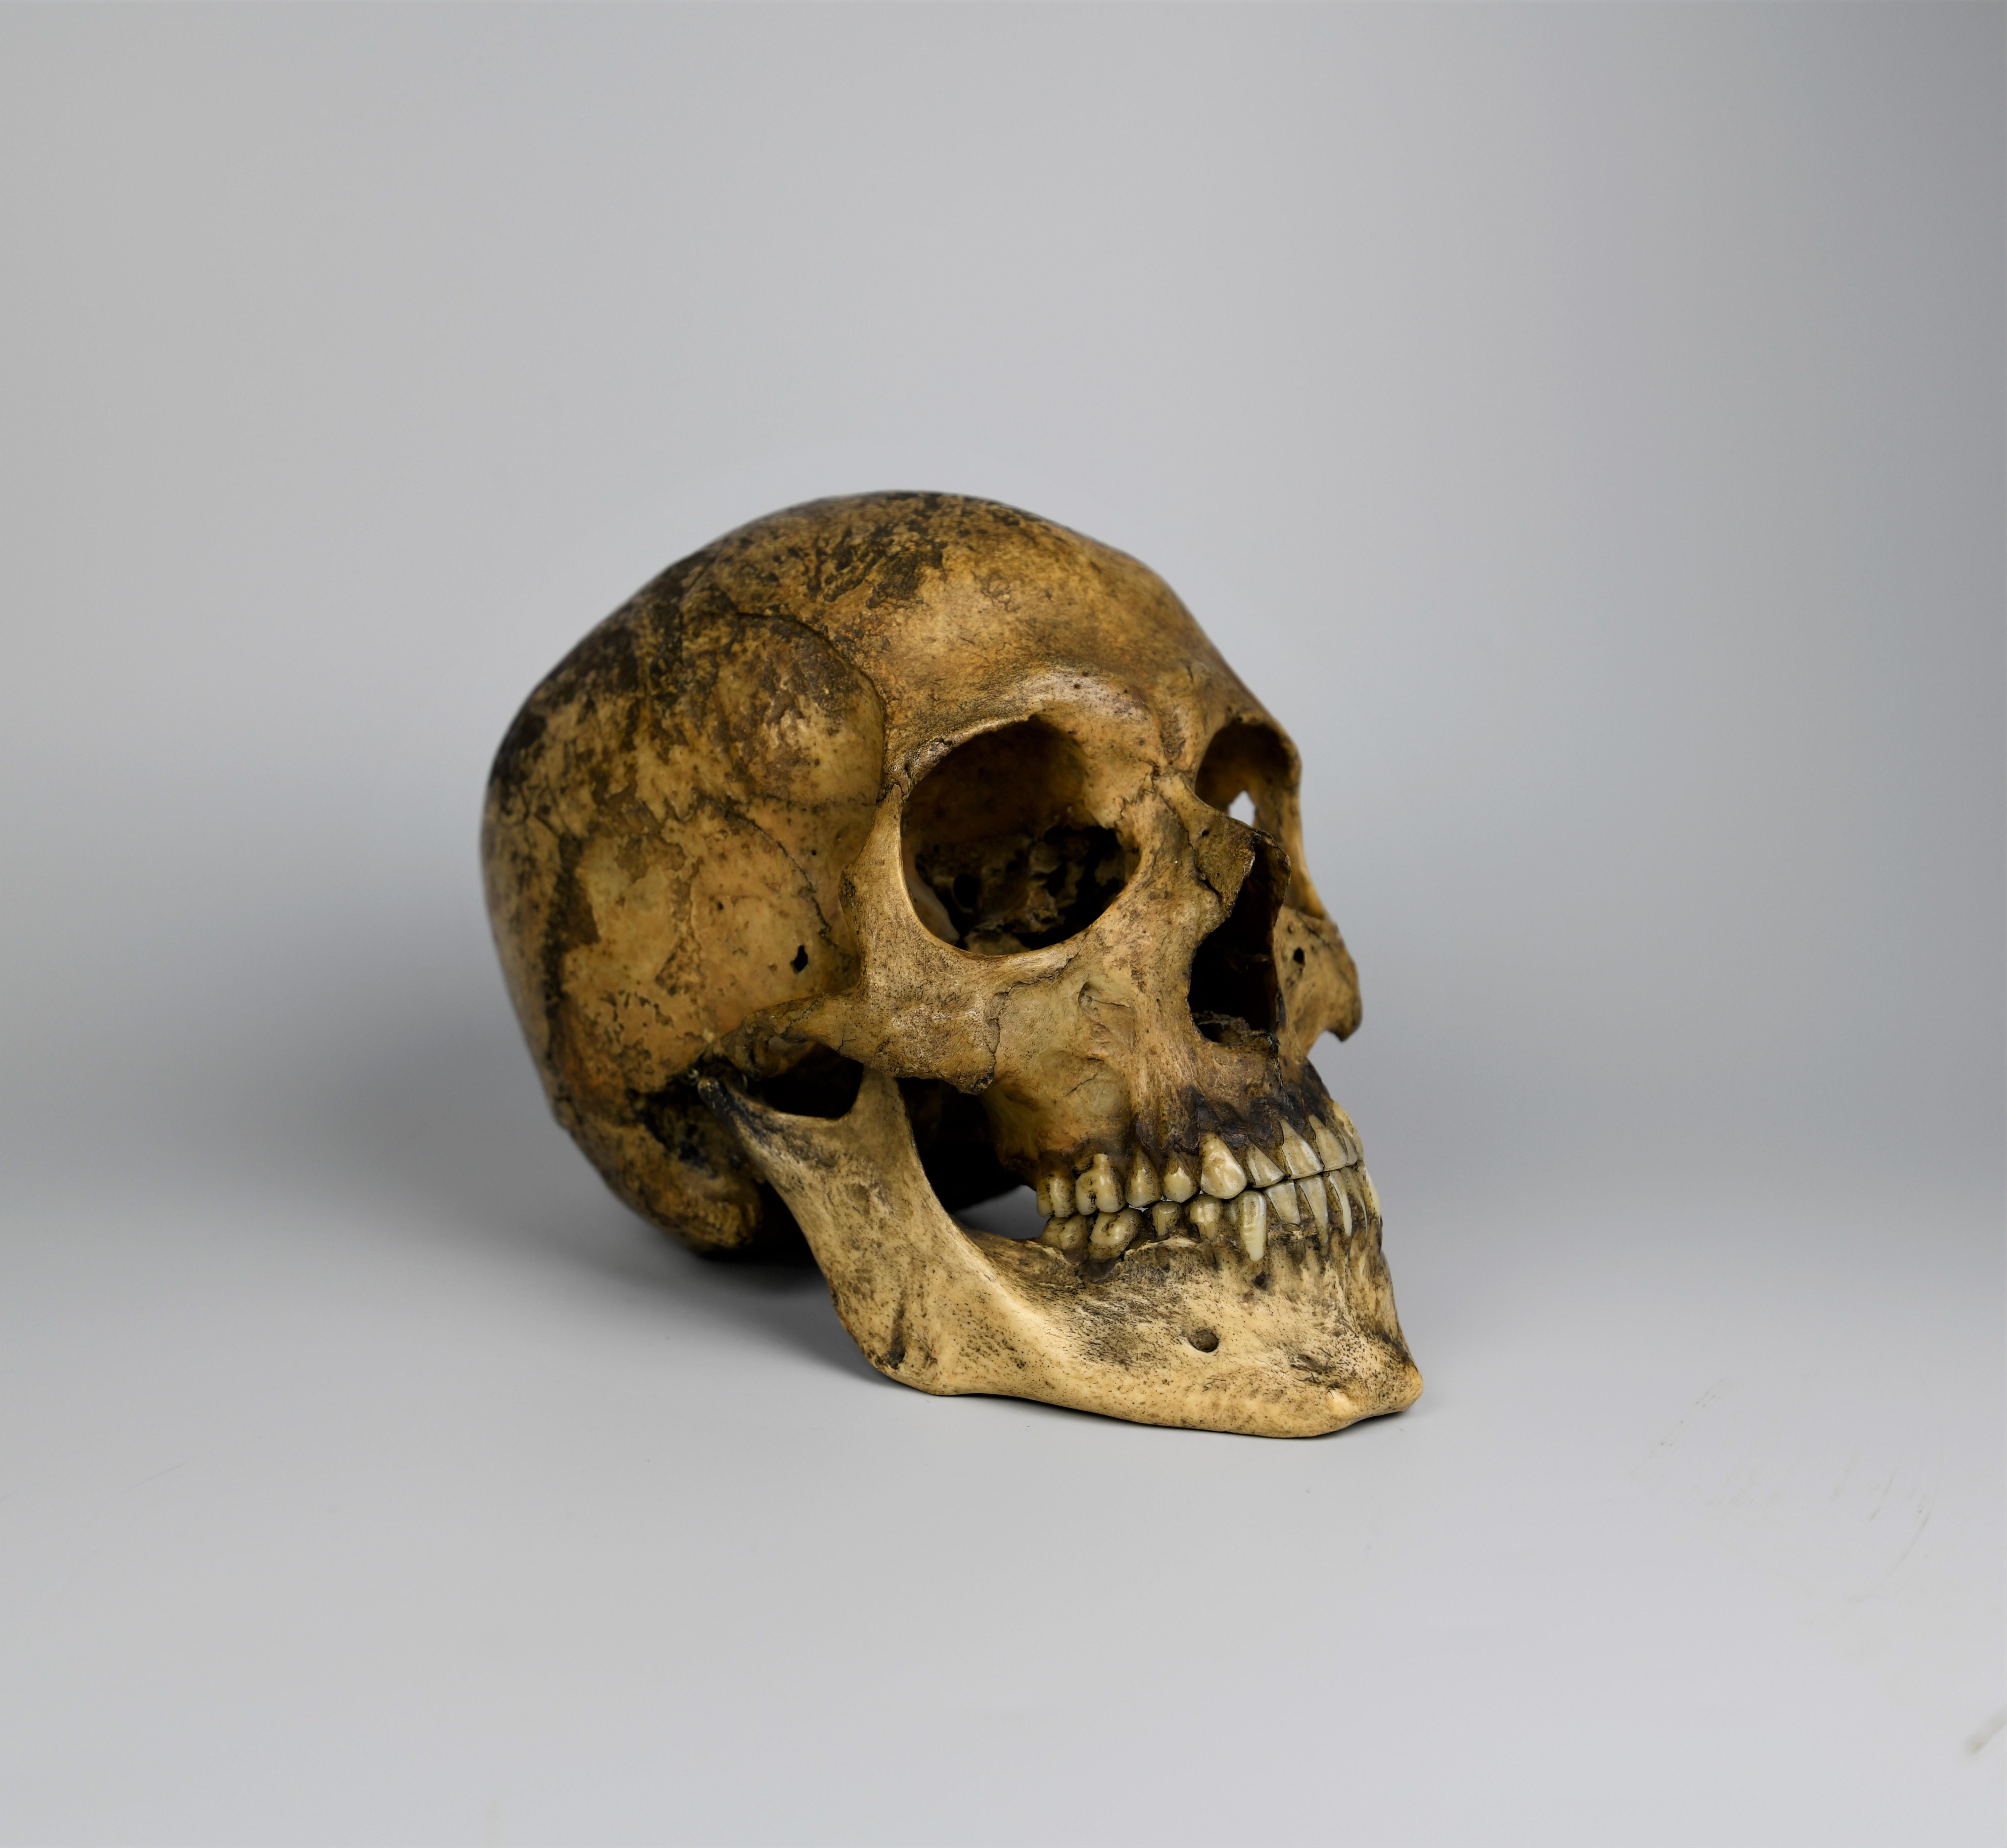 Superior example of a human (Medical) skull, 19th century. This skull was for medical use and display purposes. On back of the skull is a hole to keep secure when fixed it's got a wonderful patina and the teeth look to have been reset in keeping